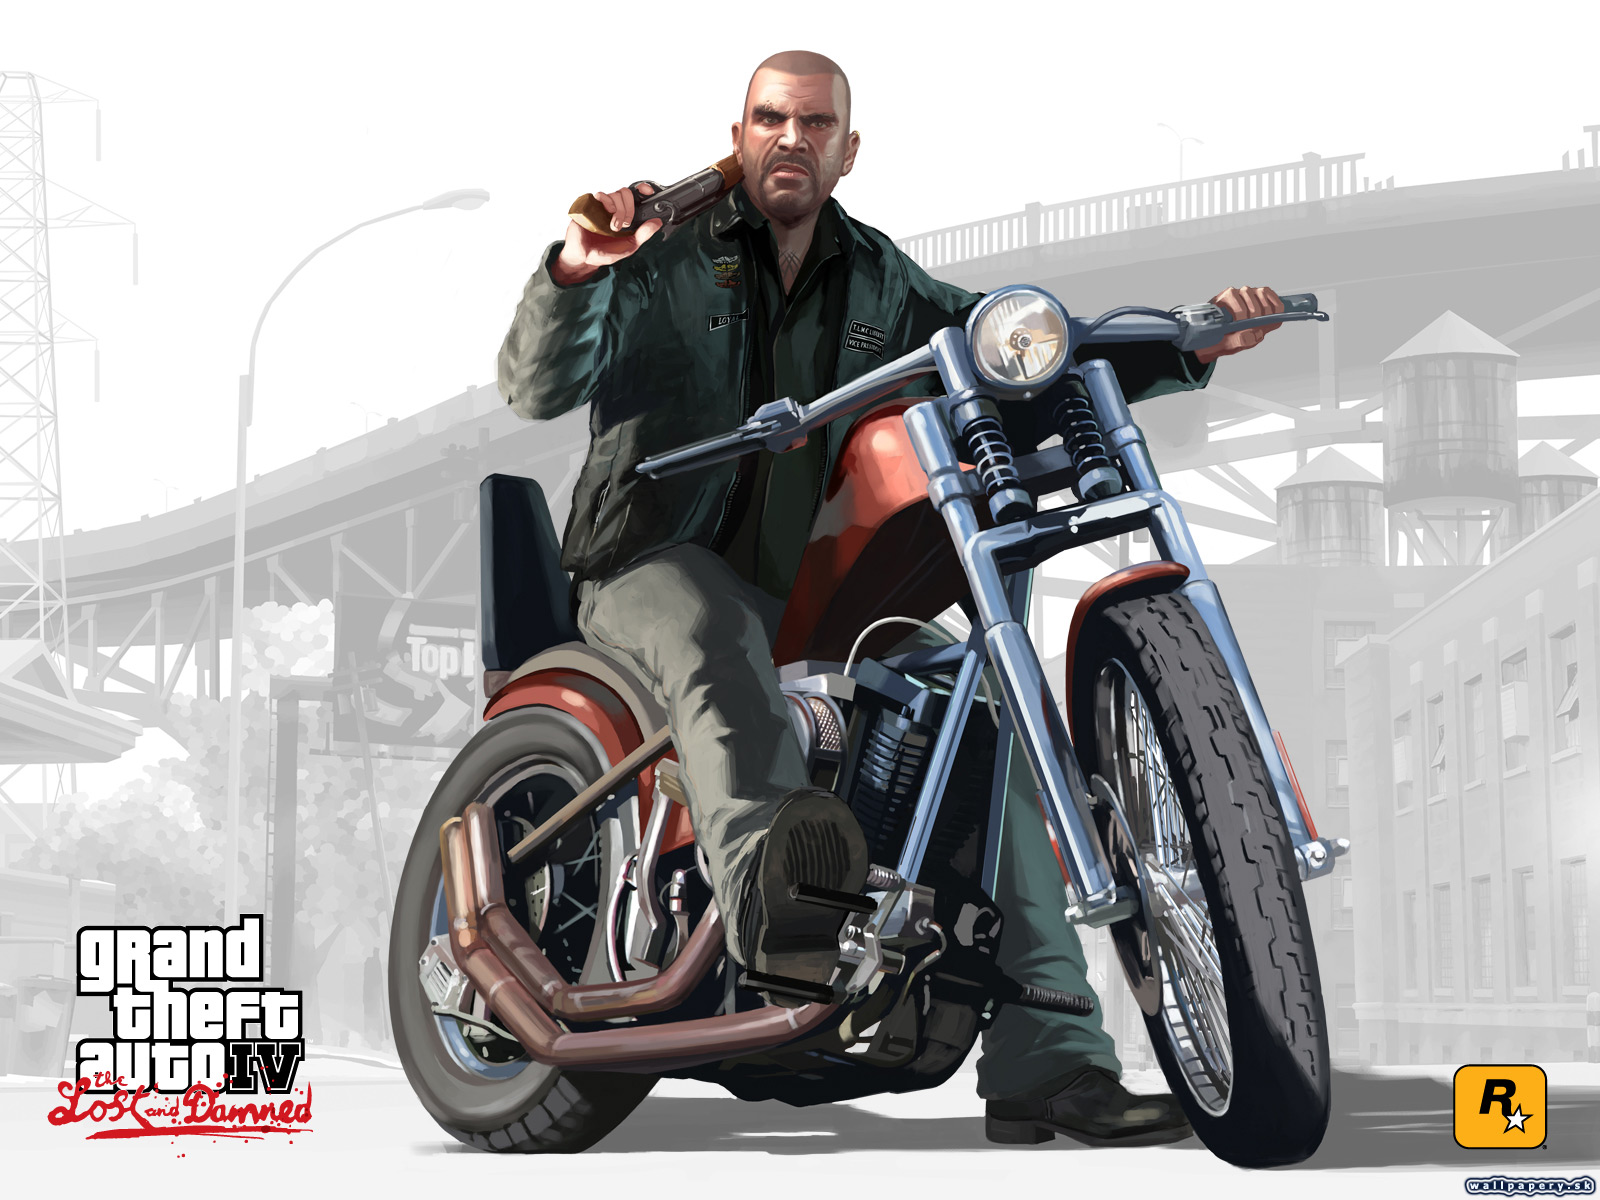 Grand Theft Auto IV: The Lost and Damned - wallpaper 1